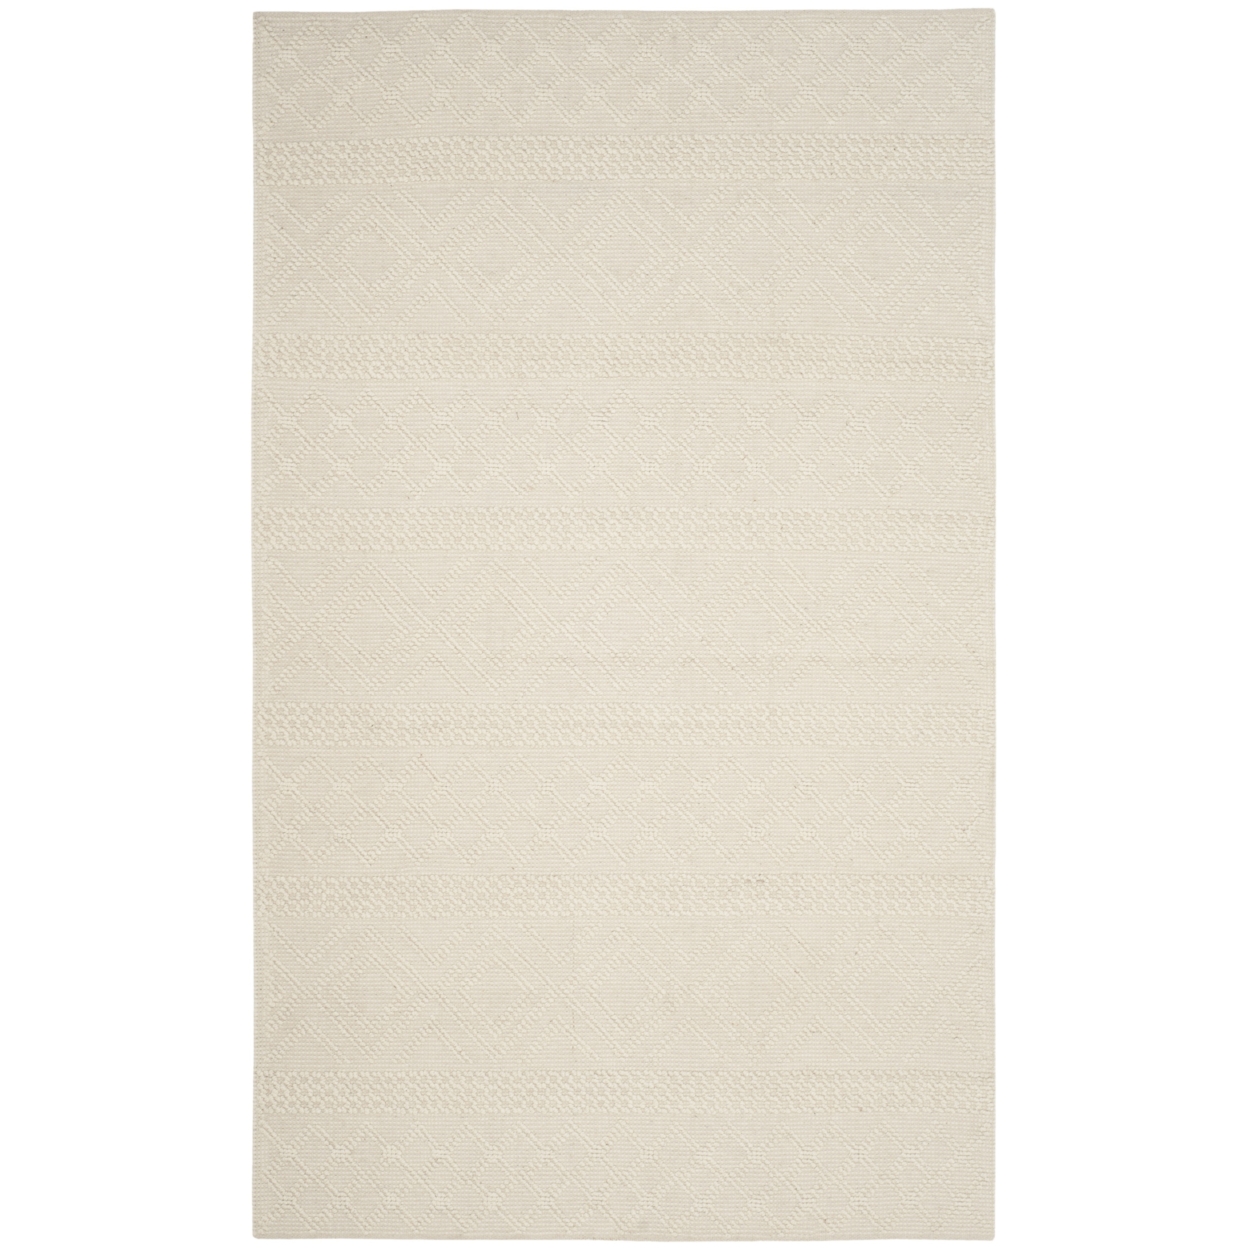 SAFAVIEH Vermont Collection VRM211A Handwoven Ivory Rug - 4' Square